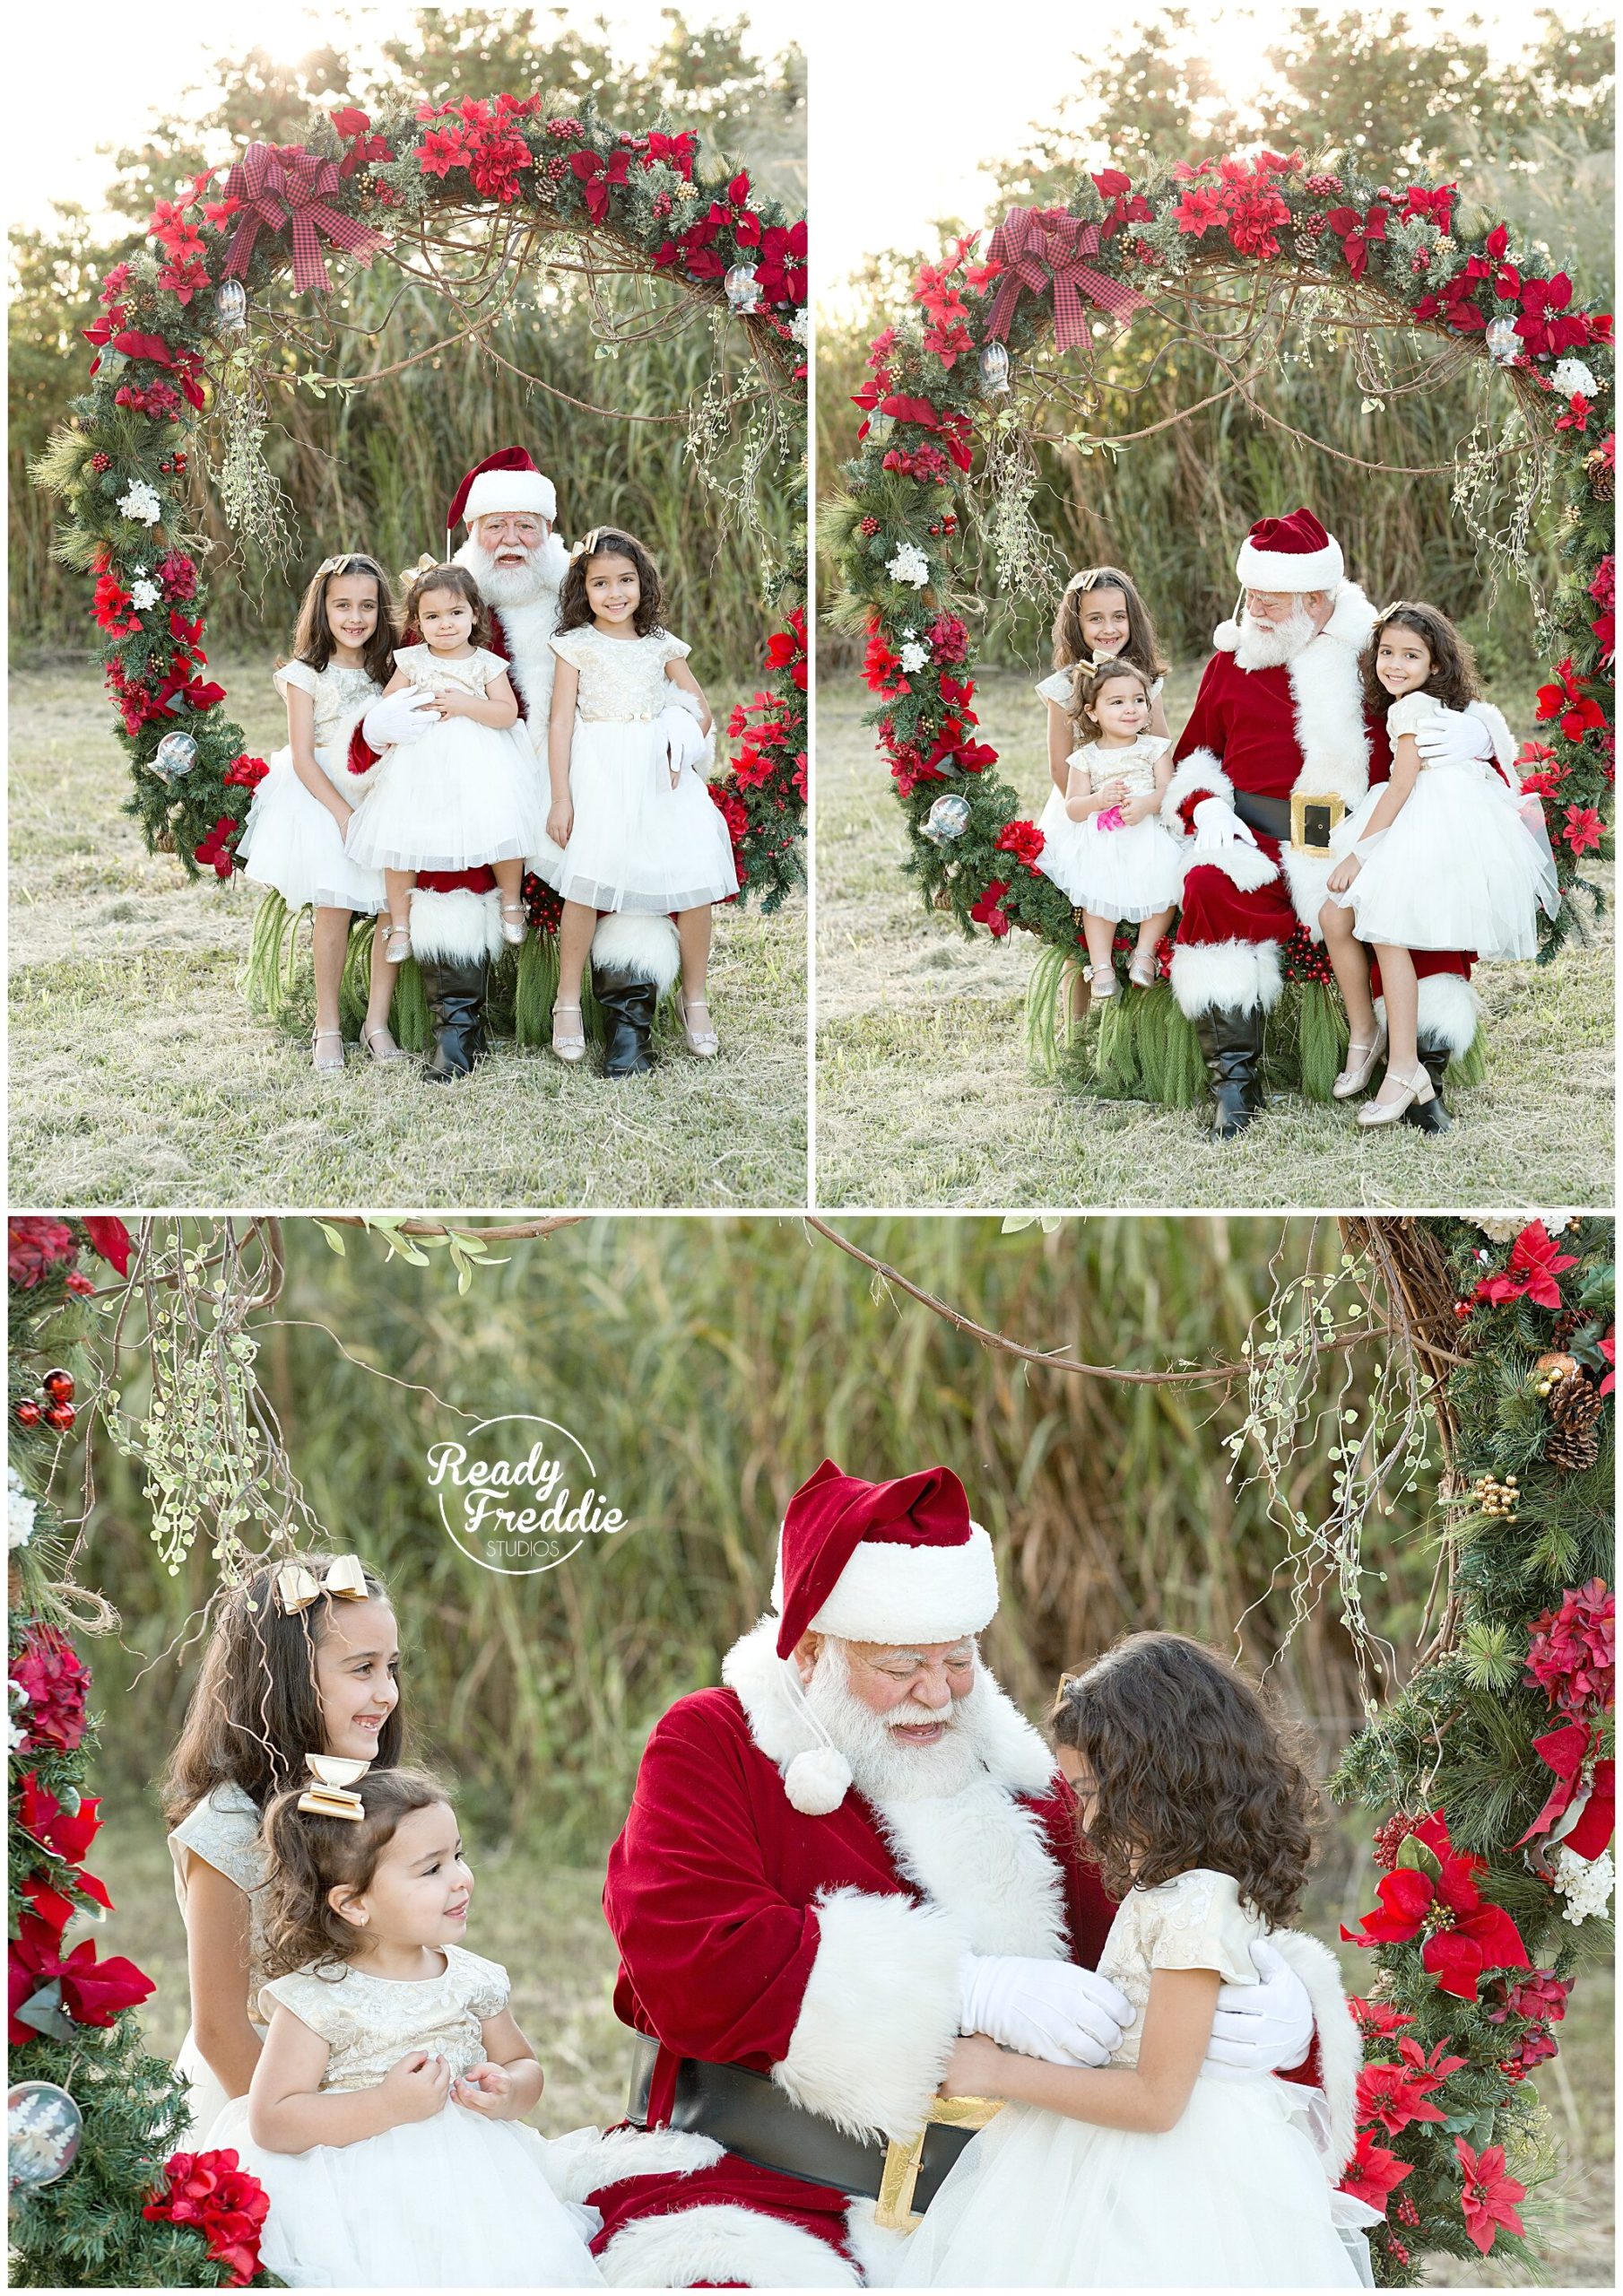 Fun pictures with Santa - Outdoor photos with giant wreath with Ivanna Vidal Photography